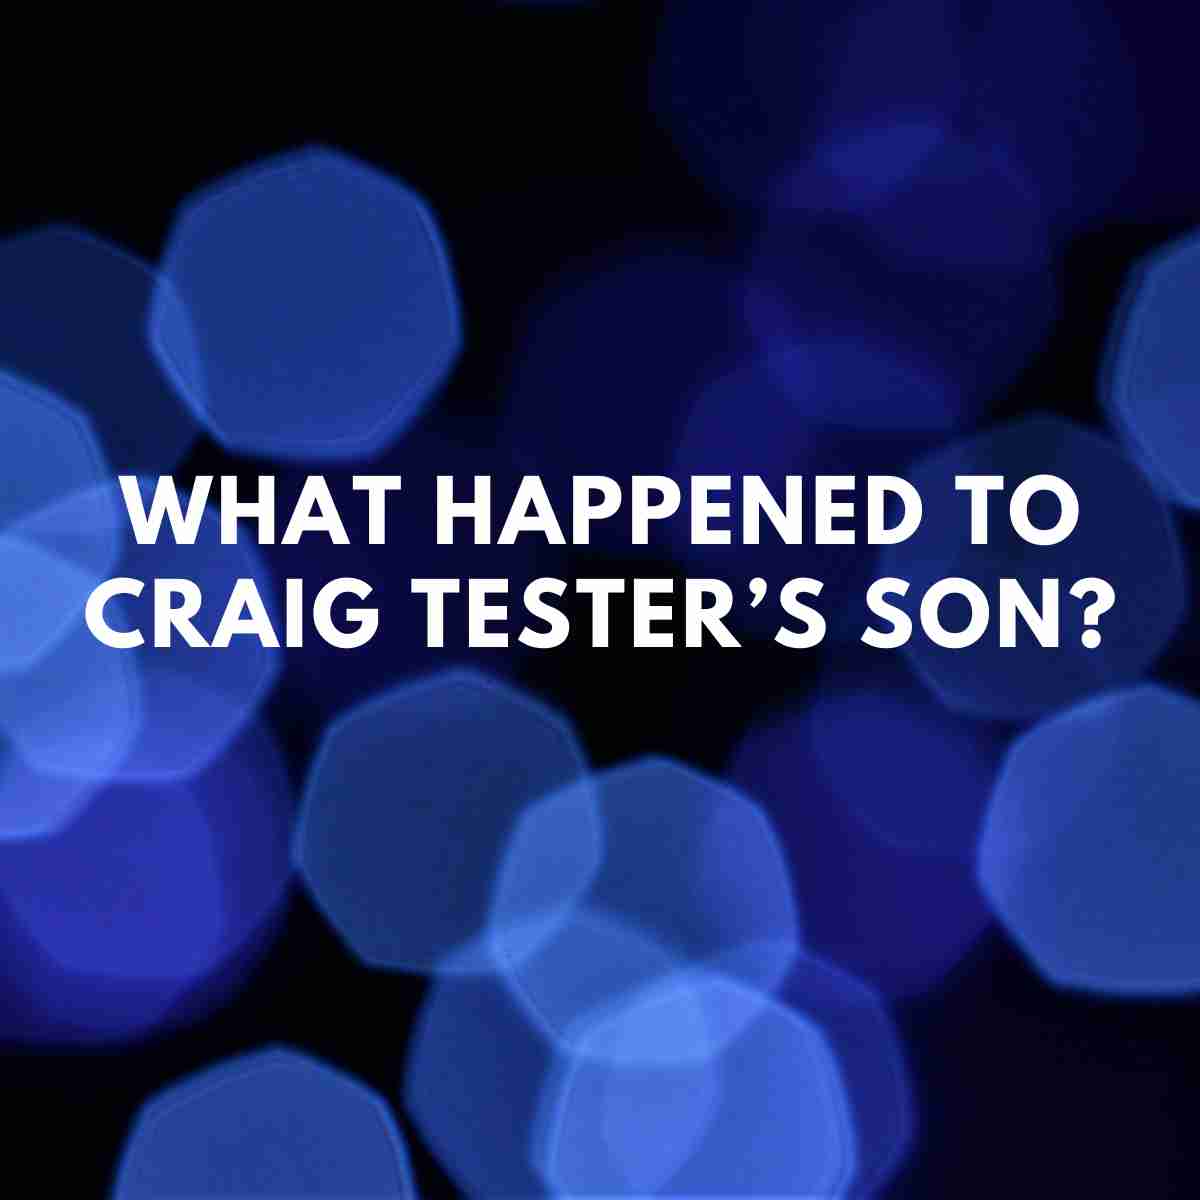 What happened to Craig Tester’s son